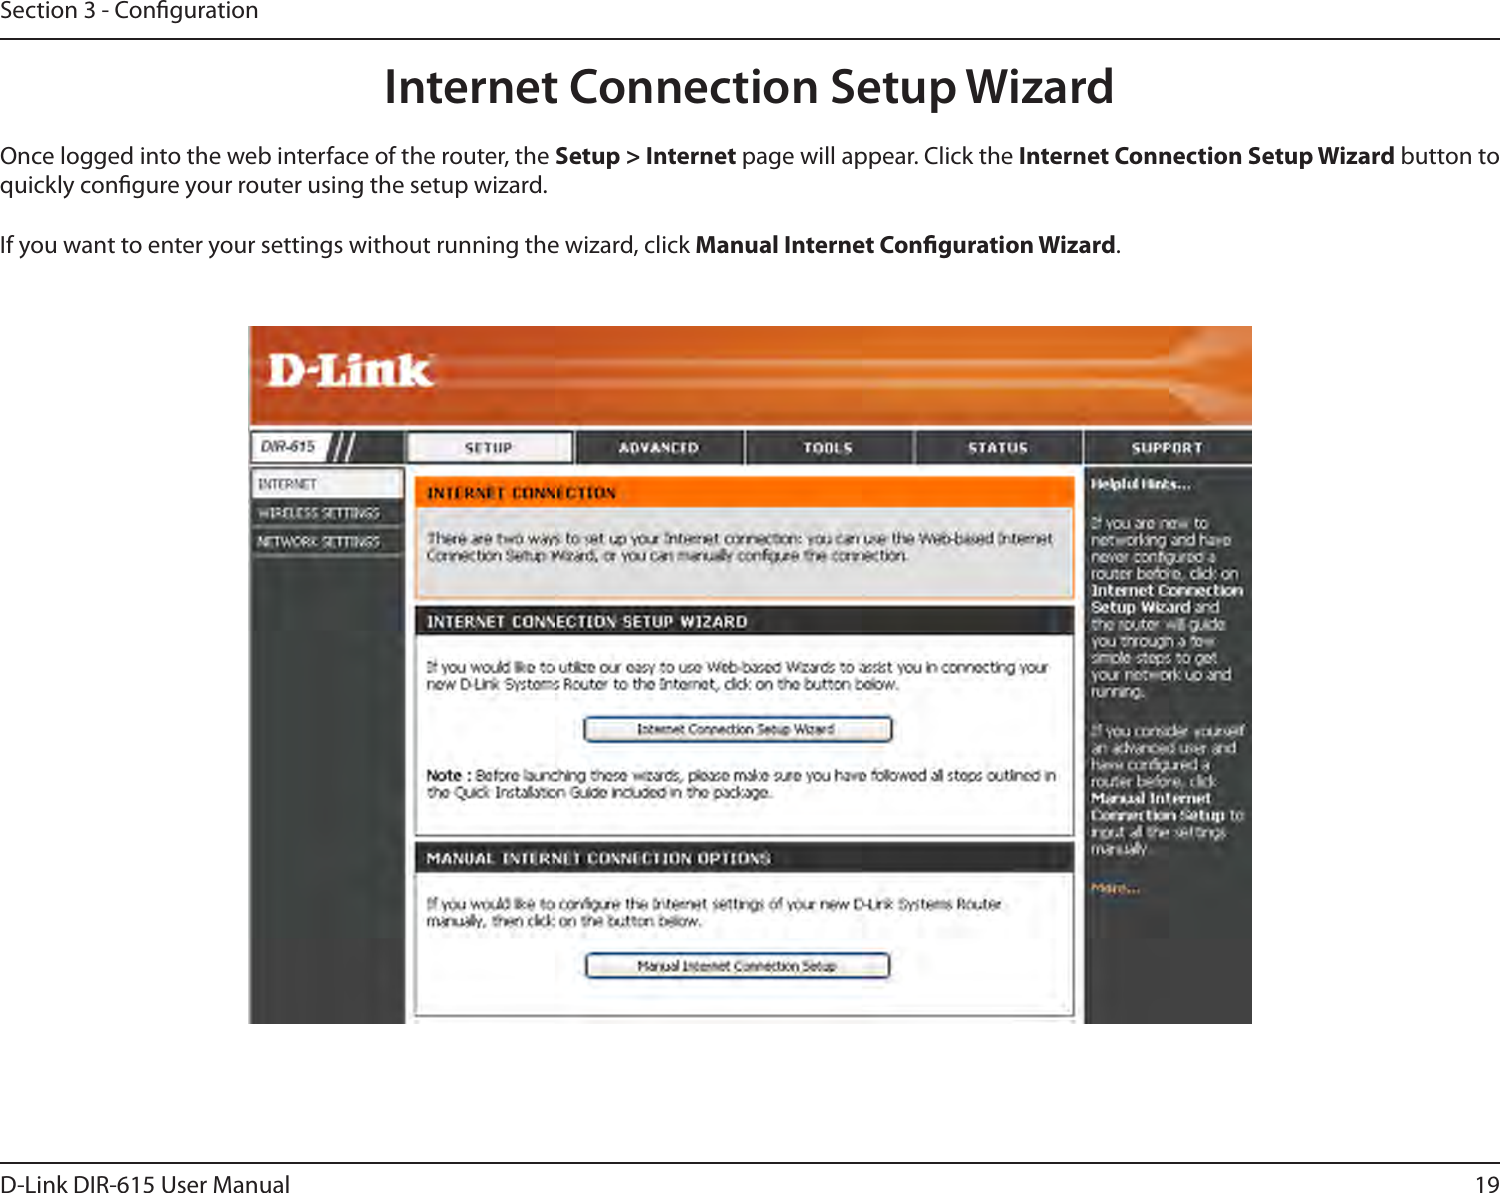 19D-Link DIR-615 User ManualSection 3 - CongurationInternet Connection Setup WizardOnce logged into the web interface of the router, the Setup &gt; Internet page will appear. Click the Internet Connection Setup Wizard button to quickly congure your router using the setup wizard.If you want to enter your settings without running the wizard, click Manual Internet Conguration Wizard.